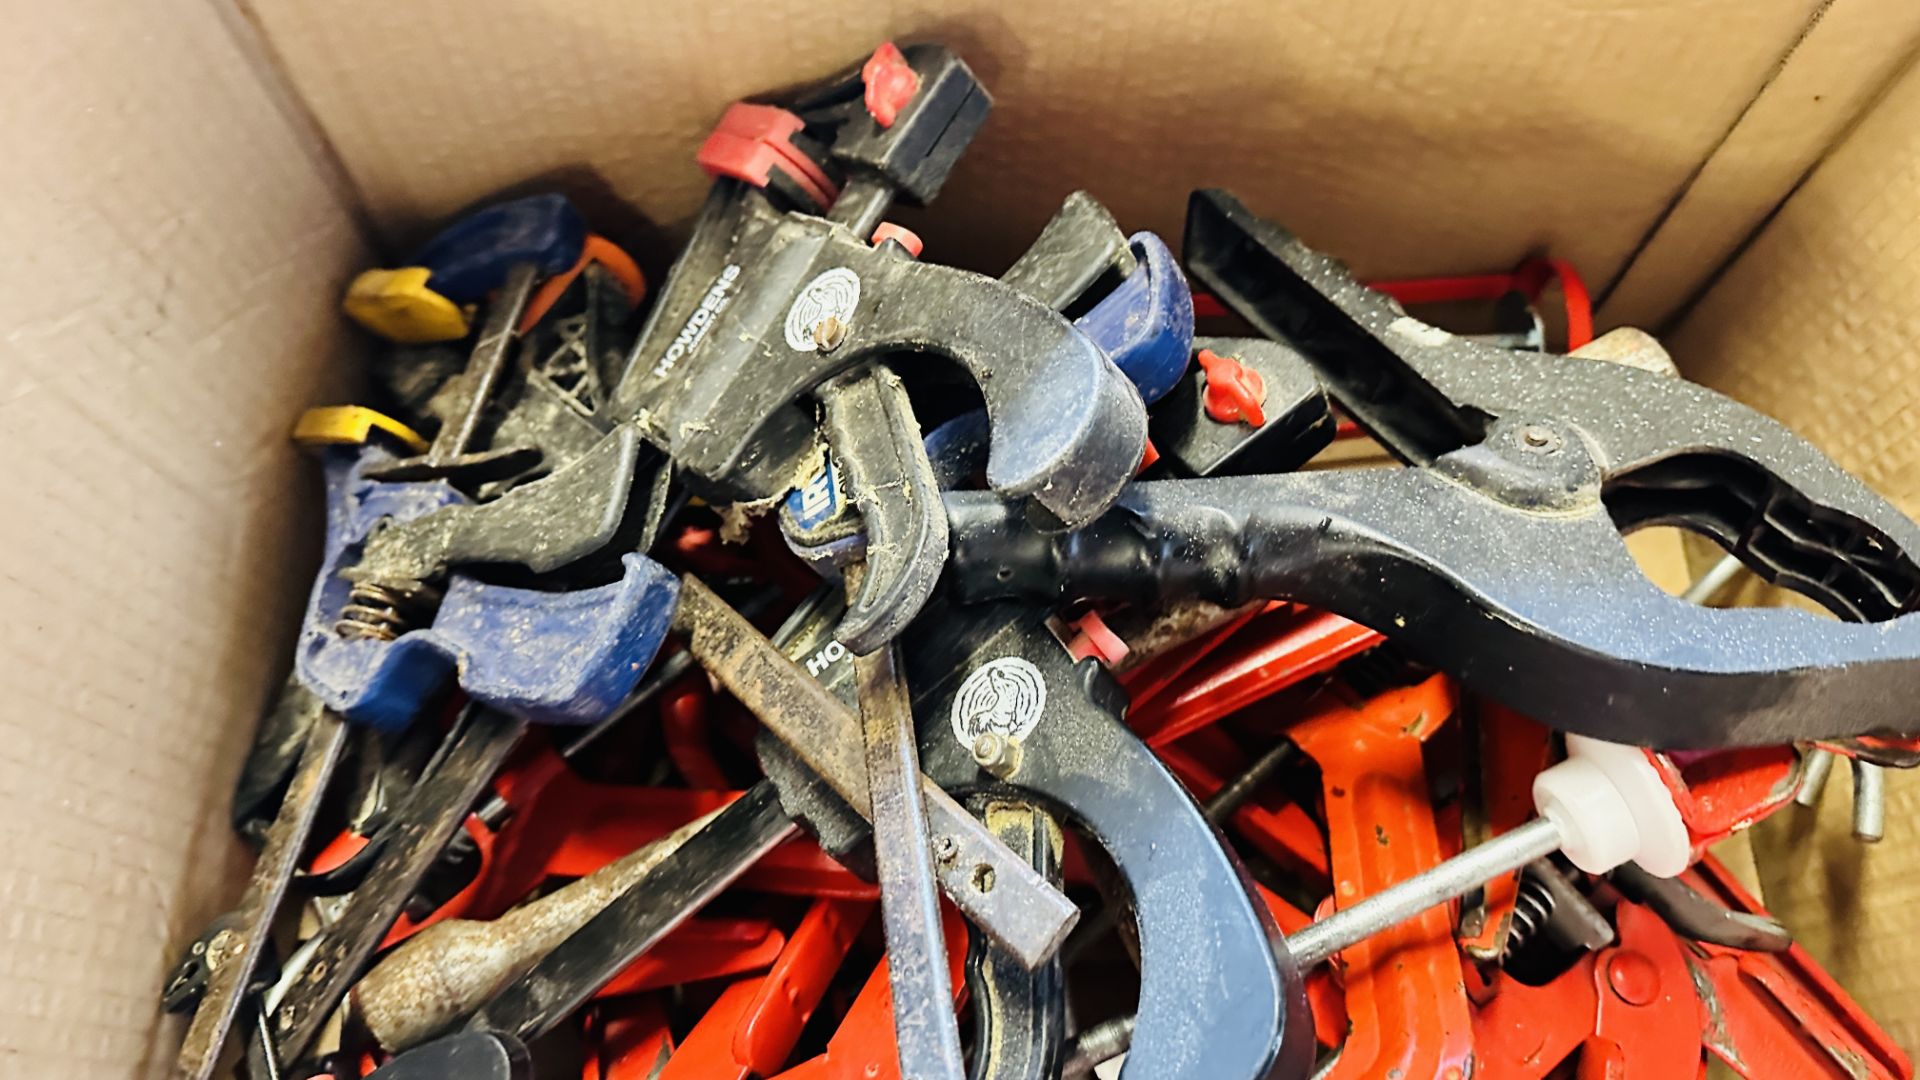 A BOX CONTAINING 11 SPEED CLAMPS, 3 MASTIC GUNS & VARIOUS OTHER SPEED CLAMPS. - Bild 3 aus 5